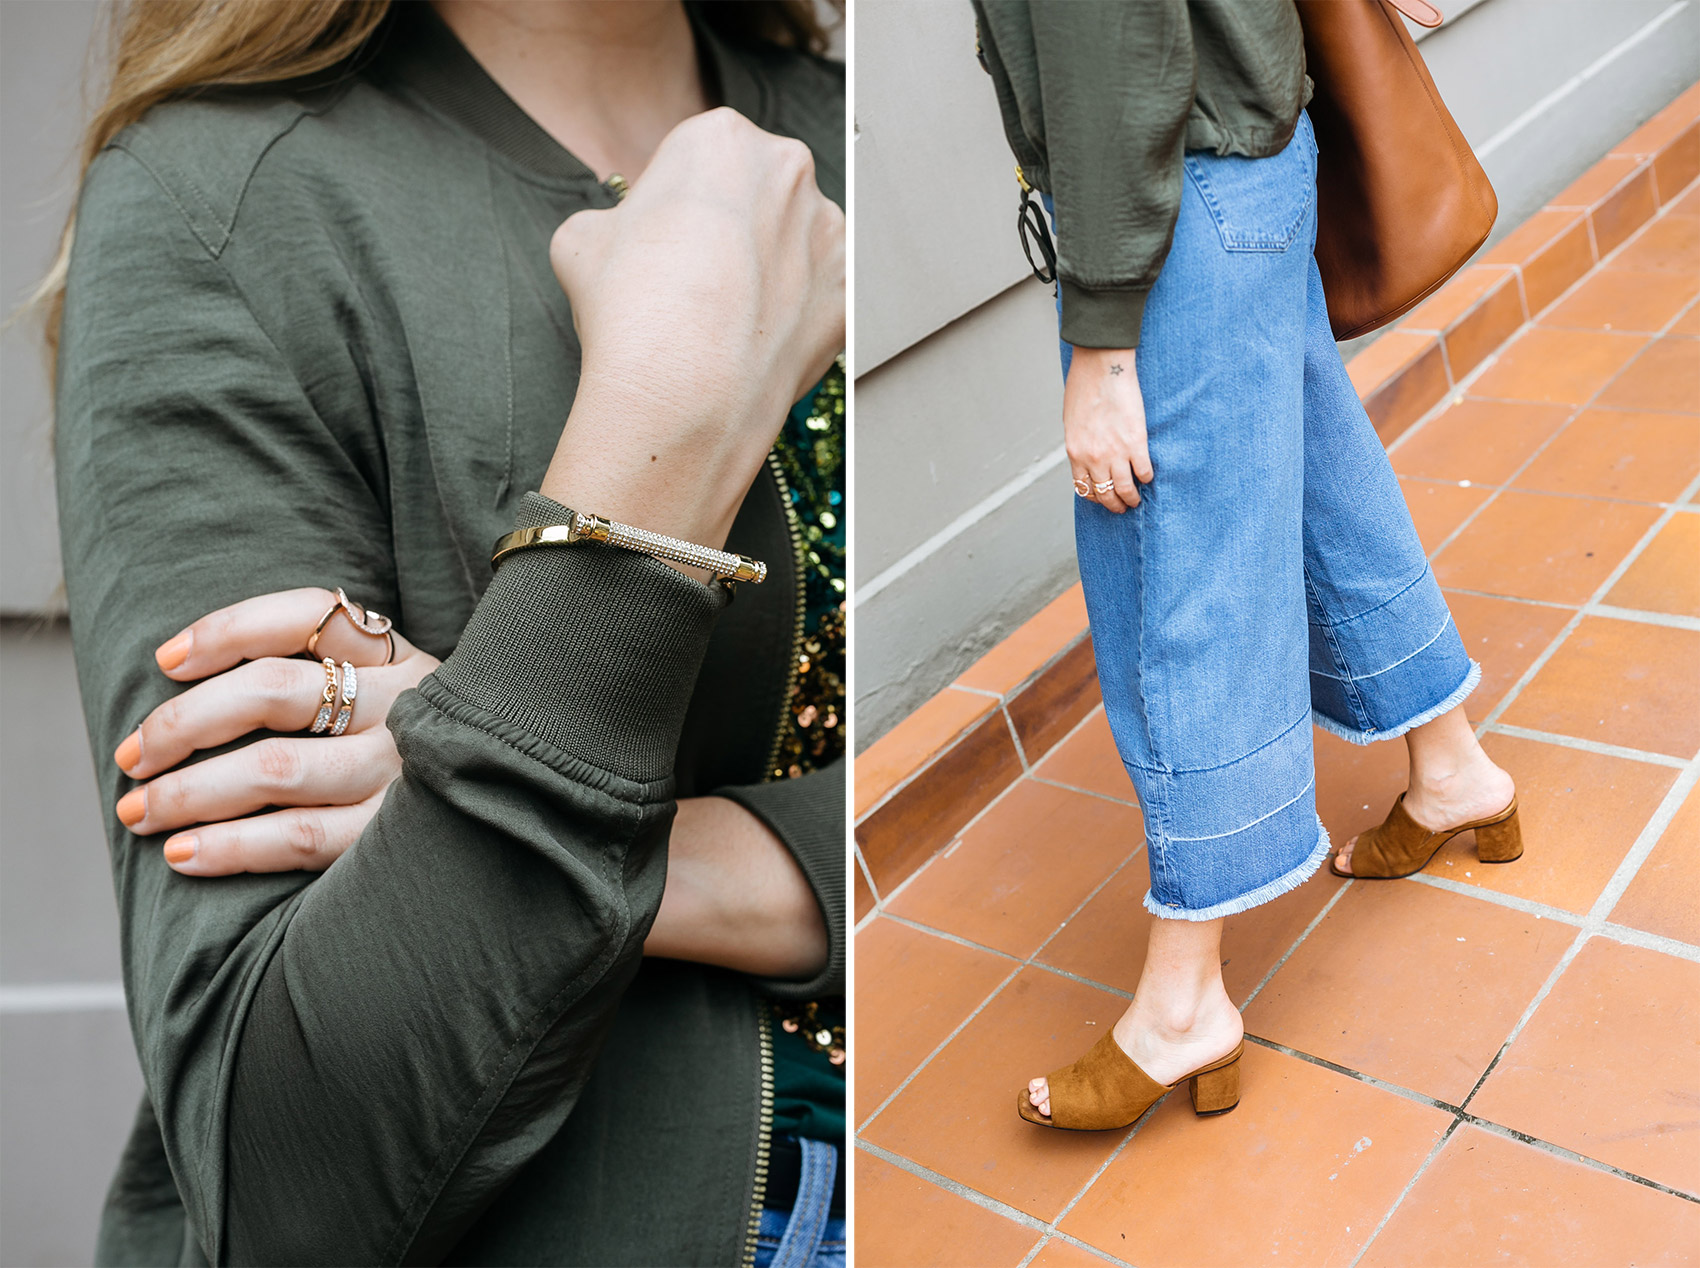 Maristella's outfit details: Swarovsky rings and bracelent, H&M satin army green bomber jacket, H&M denim culottes, Zara suede mules, Coach bucket bag